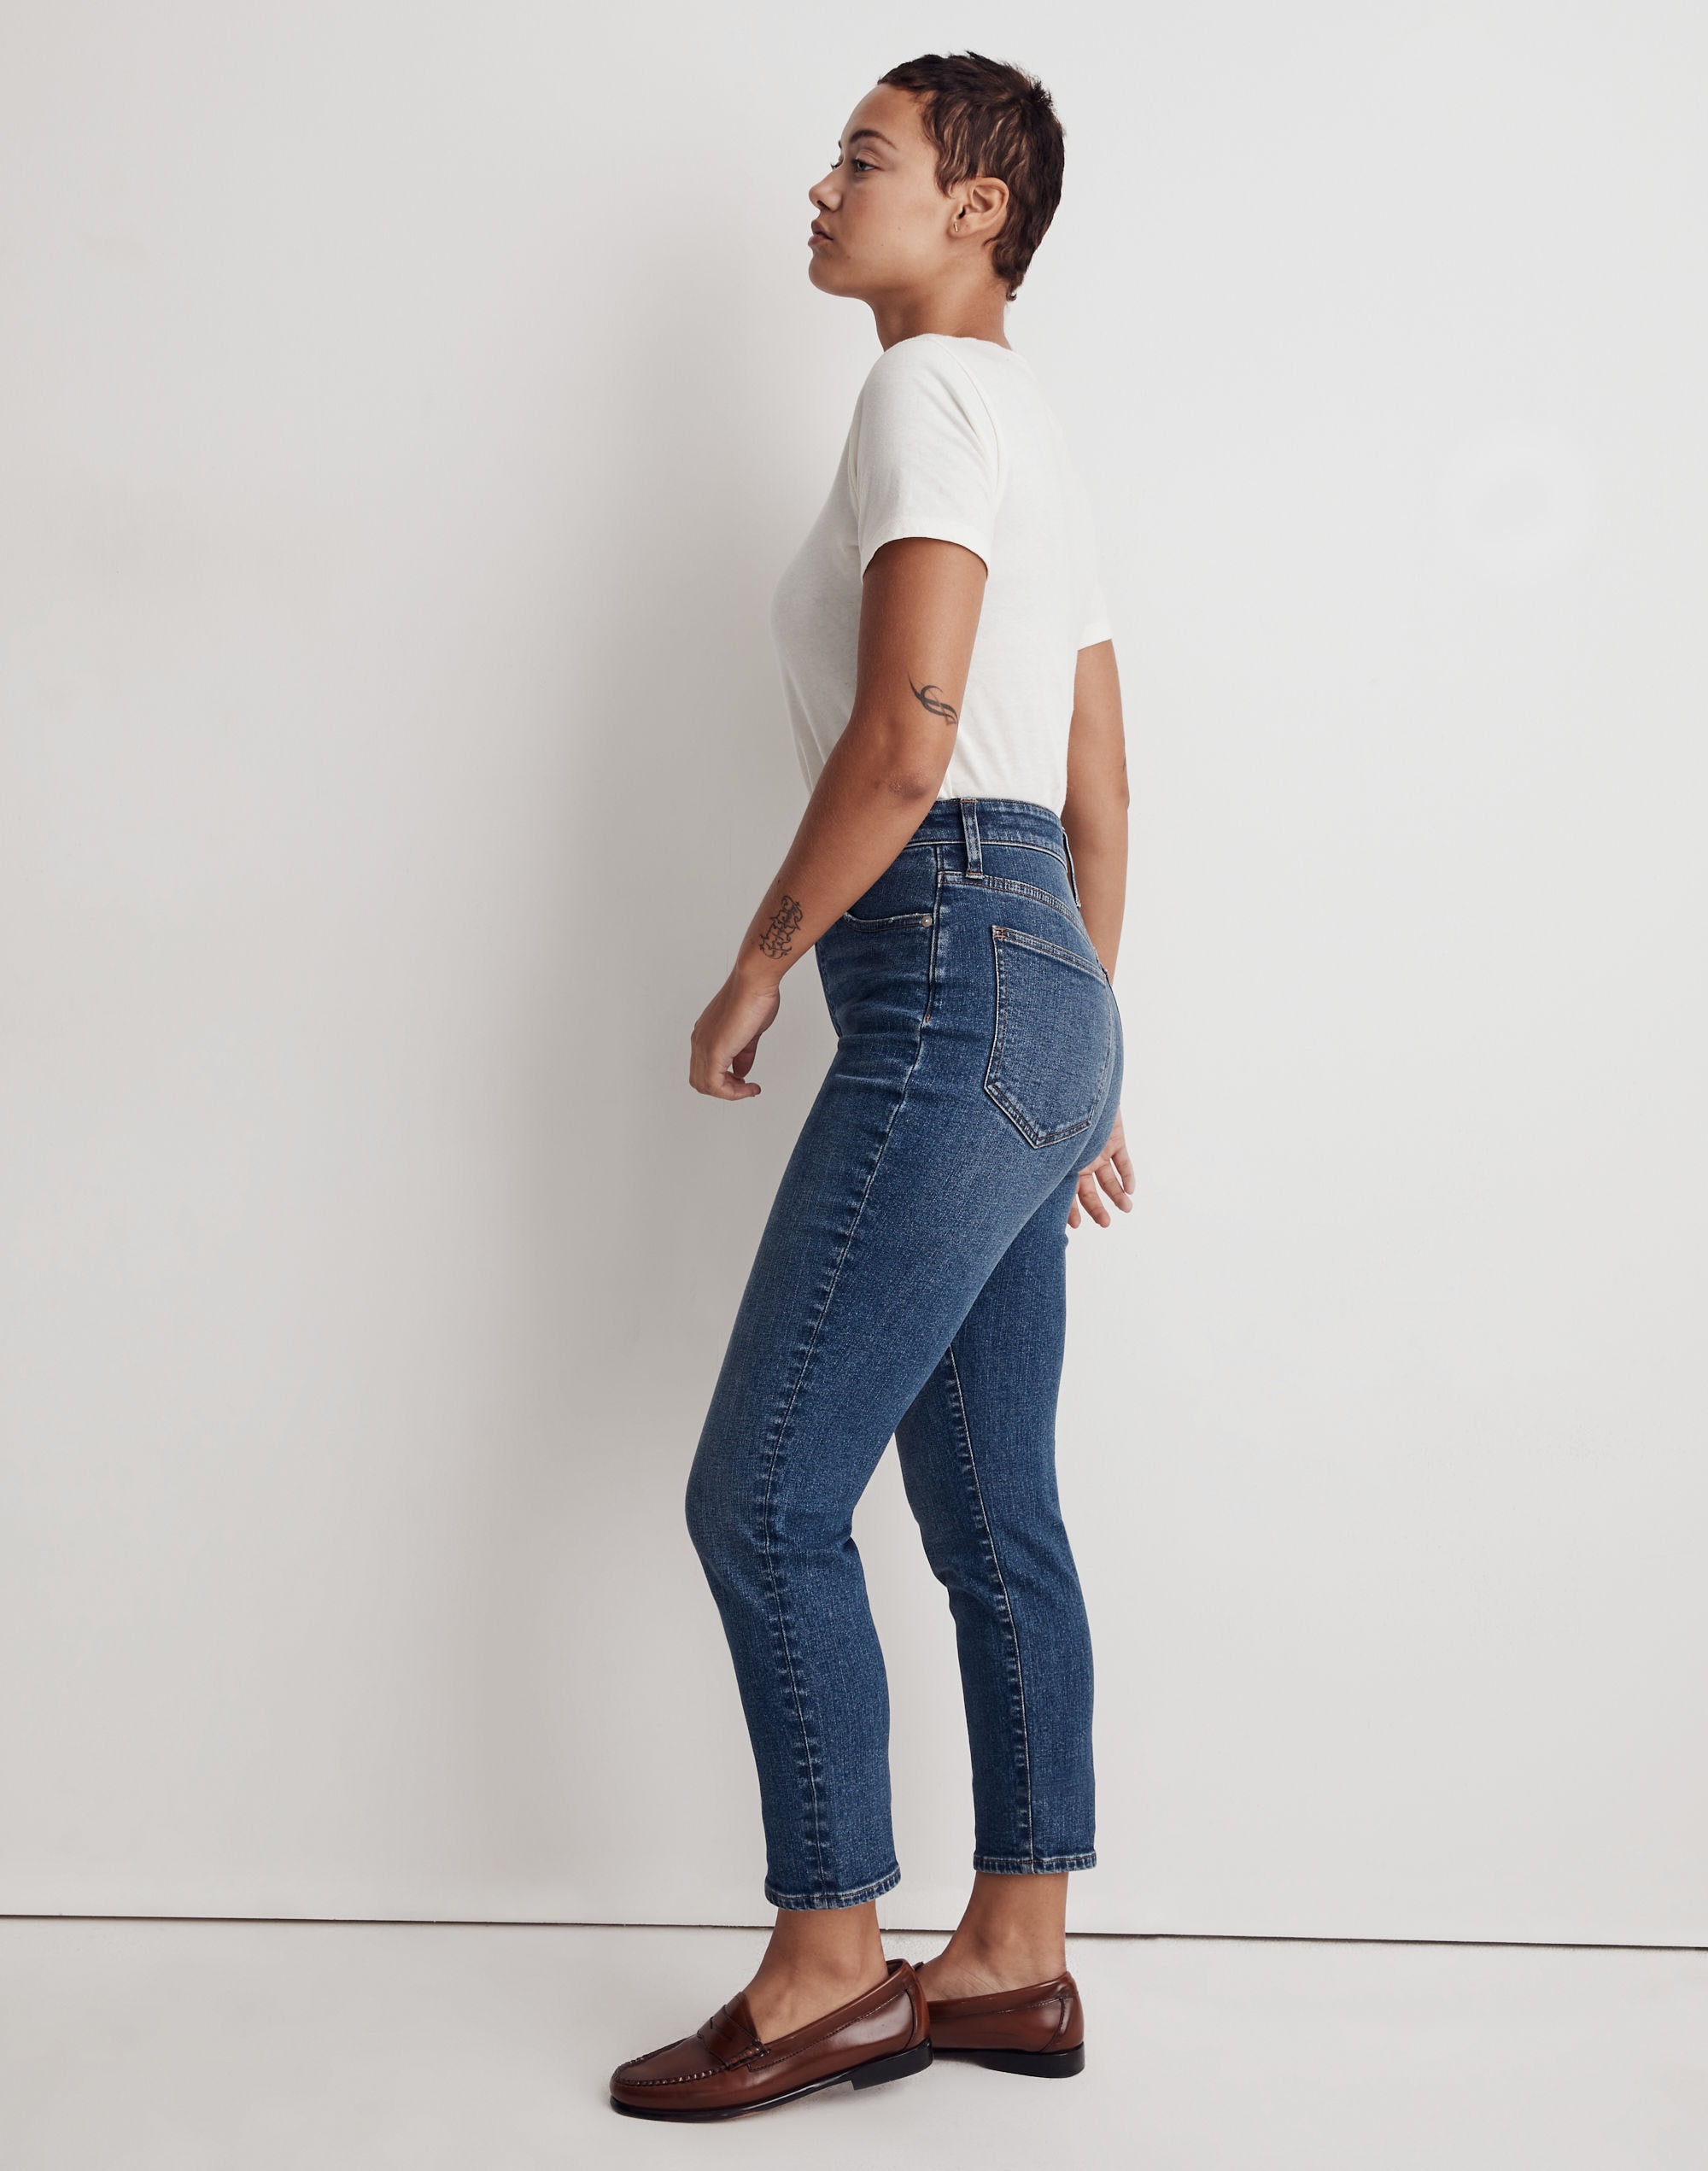 The Curvy Perfect Vintage Jean Manorford Wash: Instacozy Edition